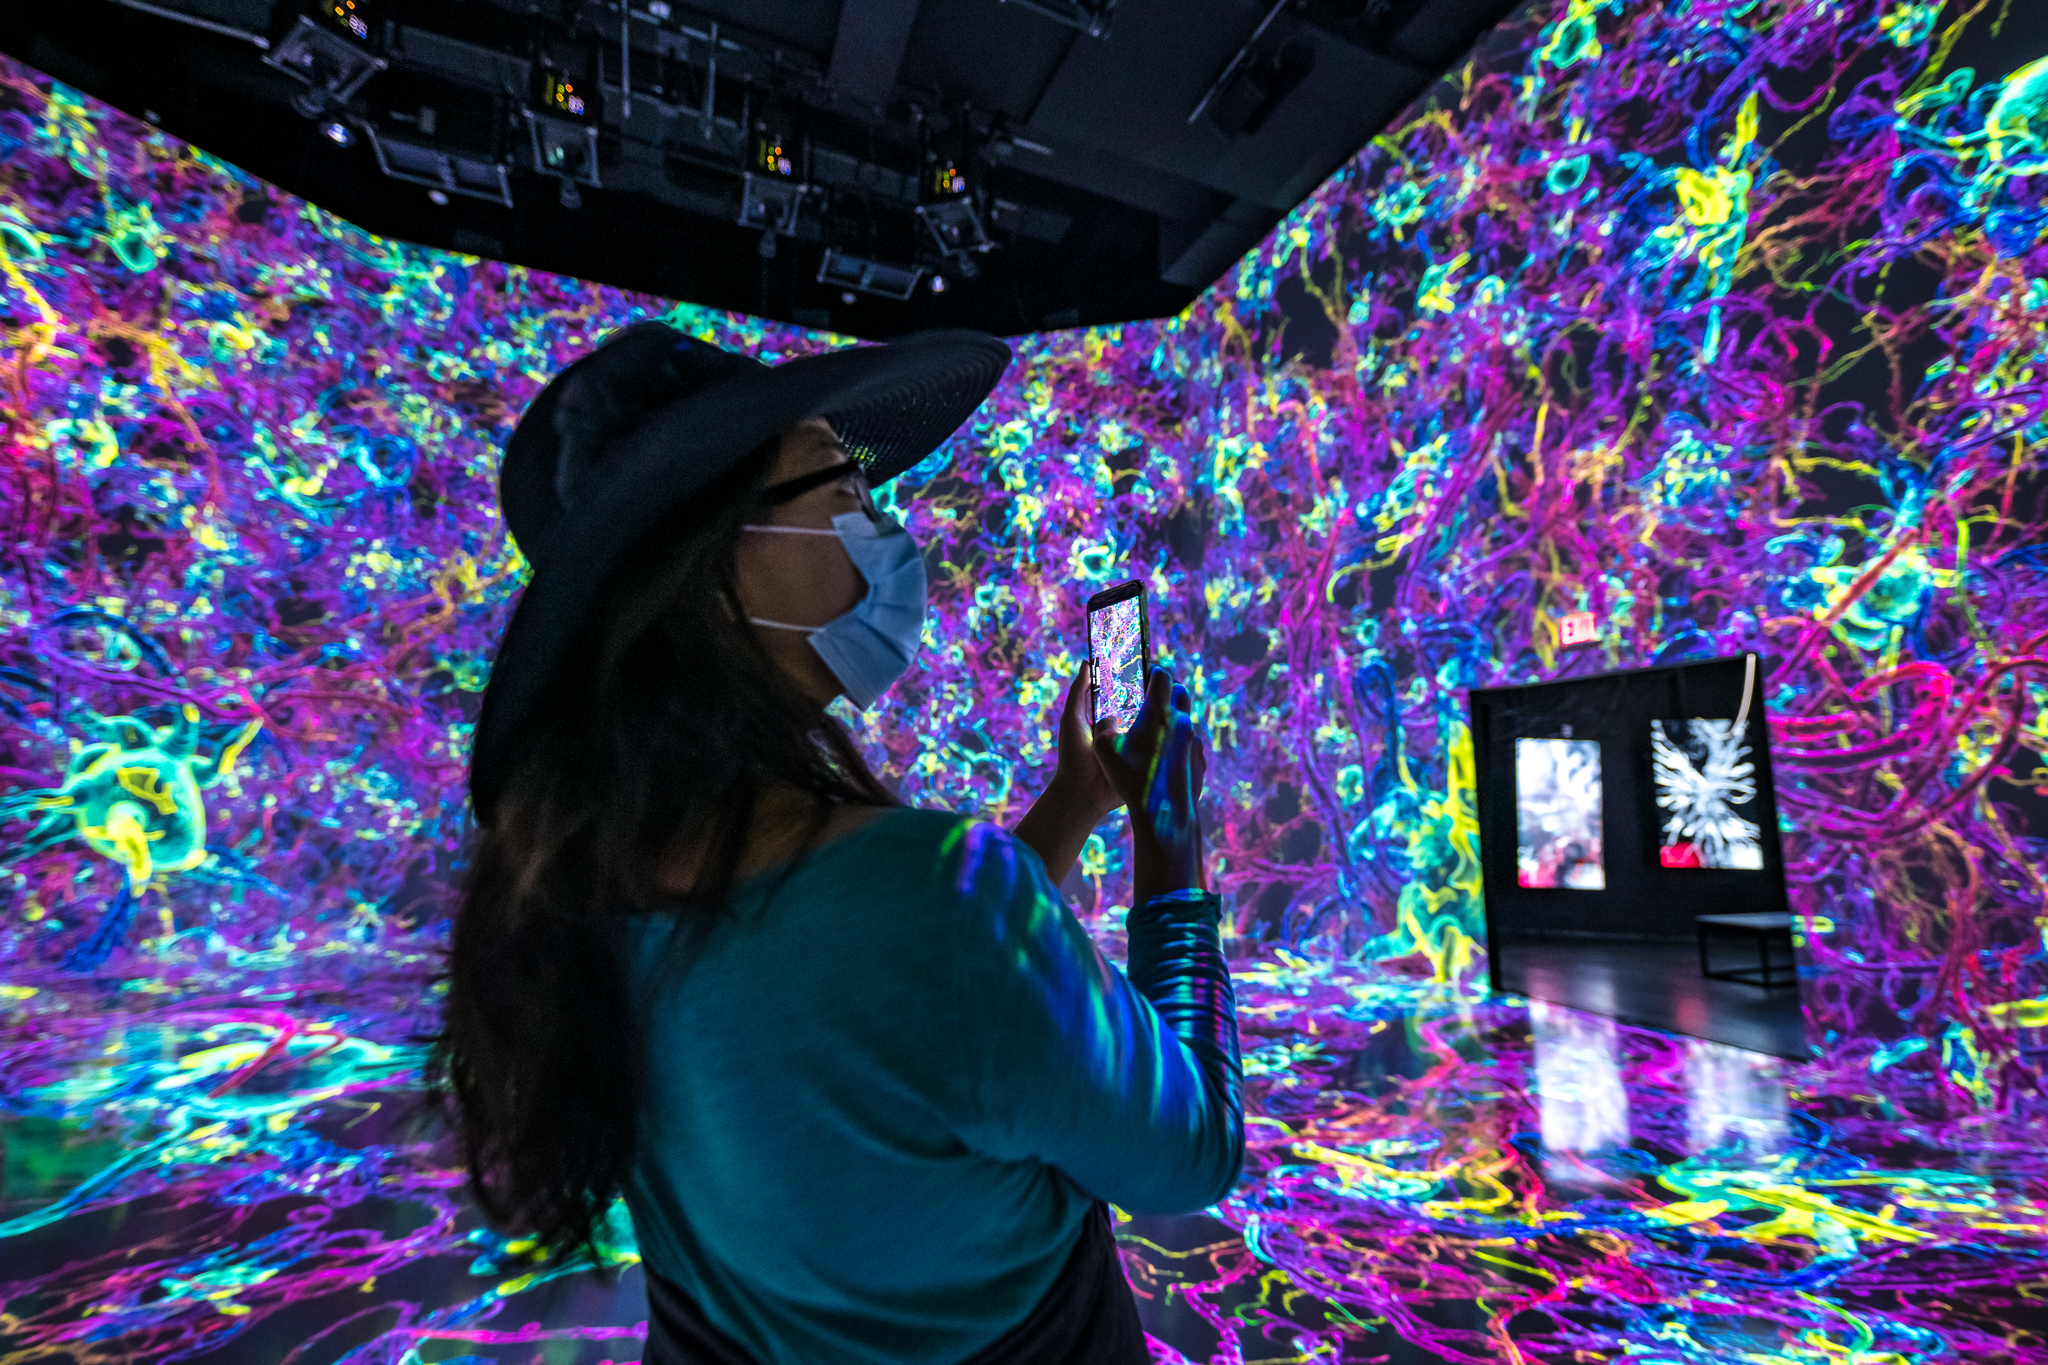 An image of a woman observing the main display at the life of a Neuron exhibit from the SfN and ARTECHOUSE collaboration.